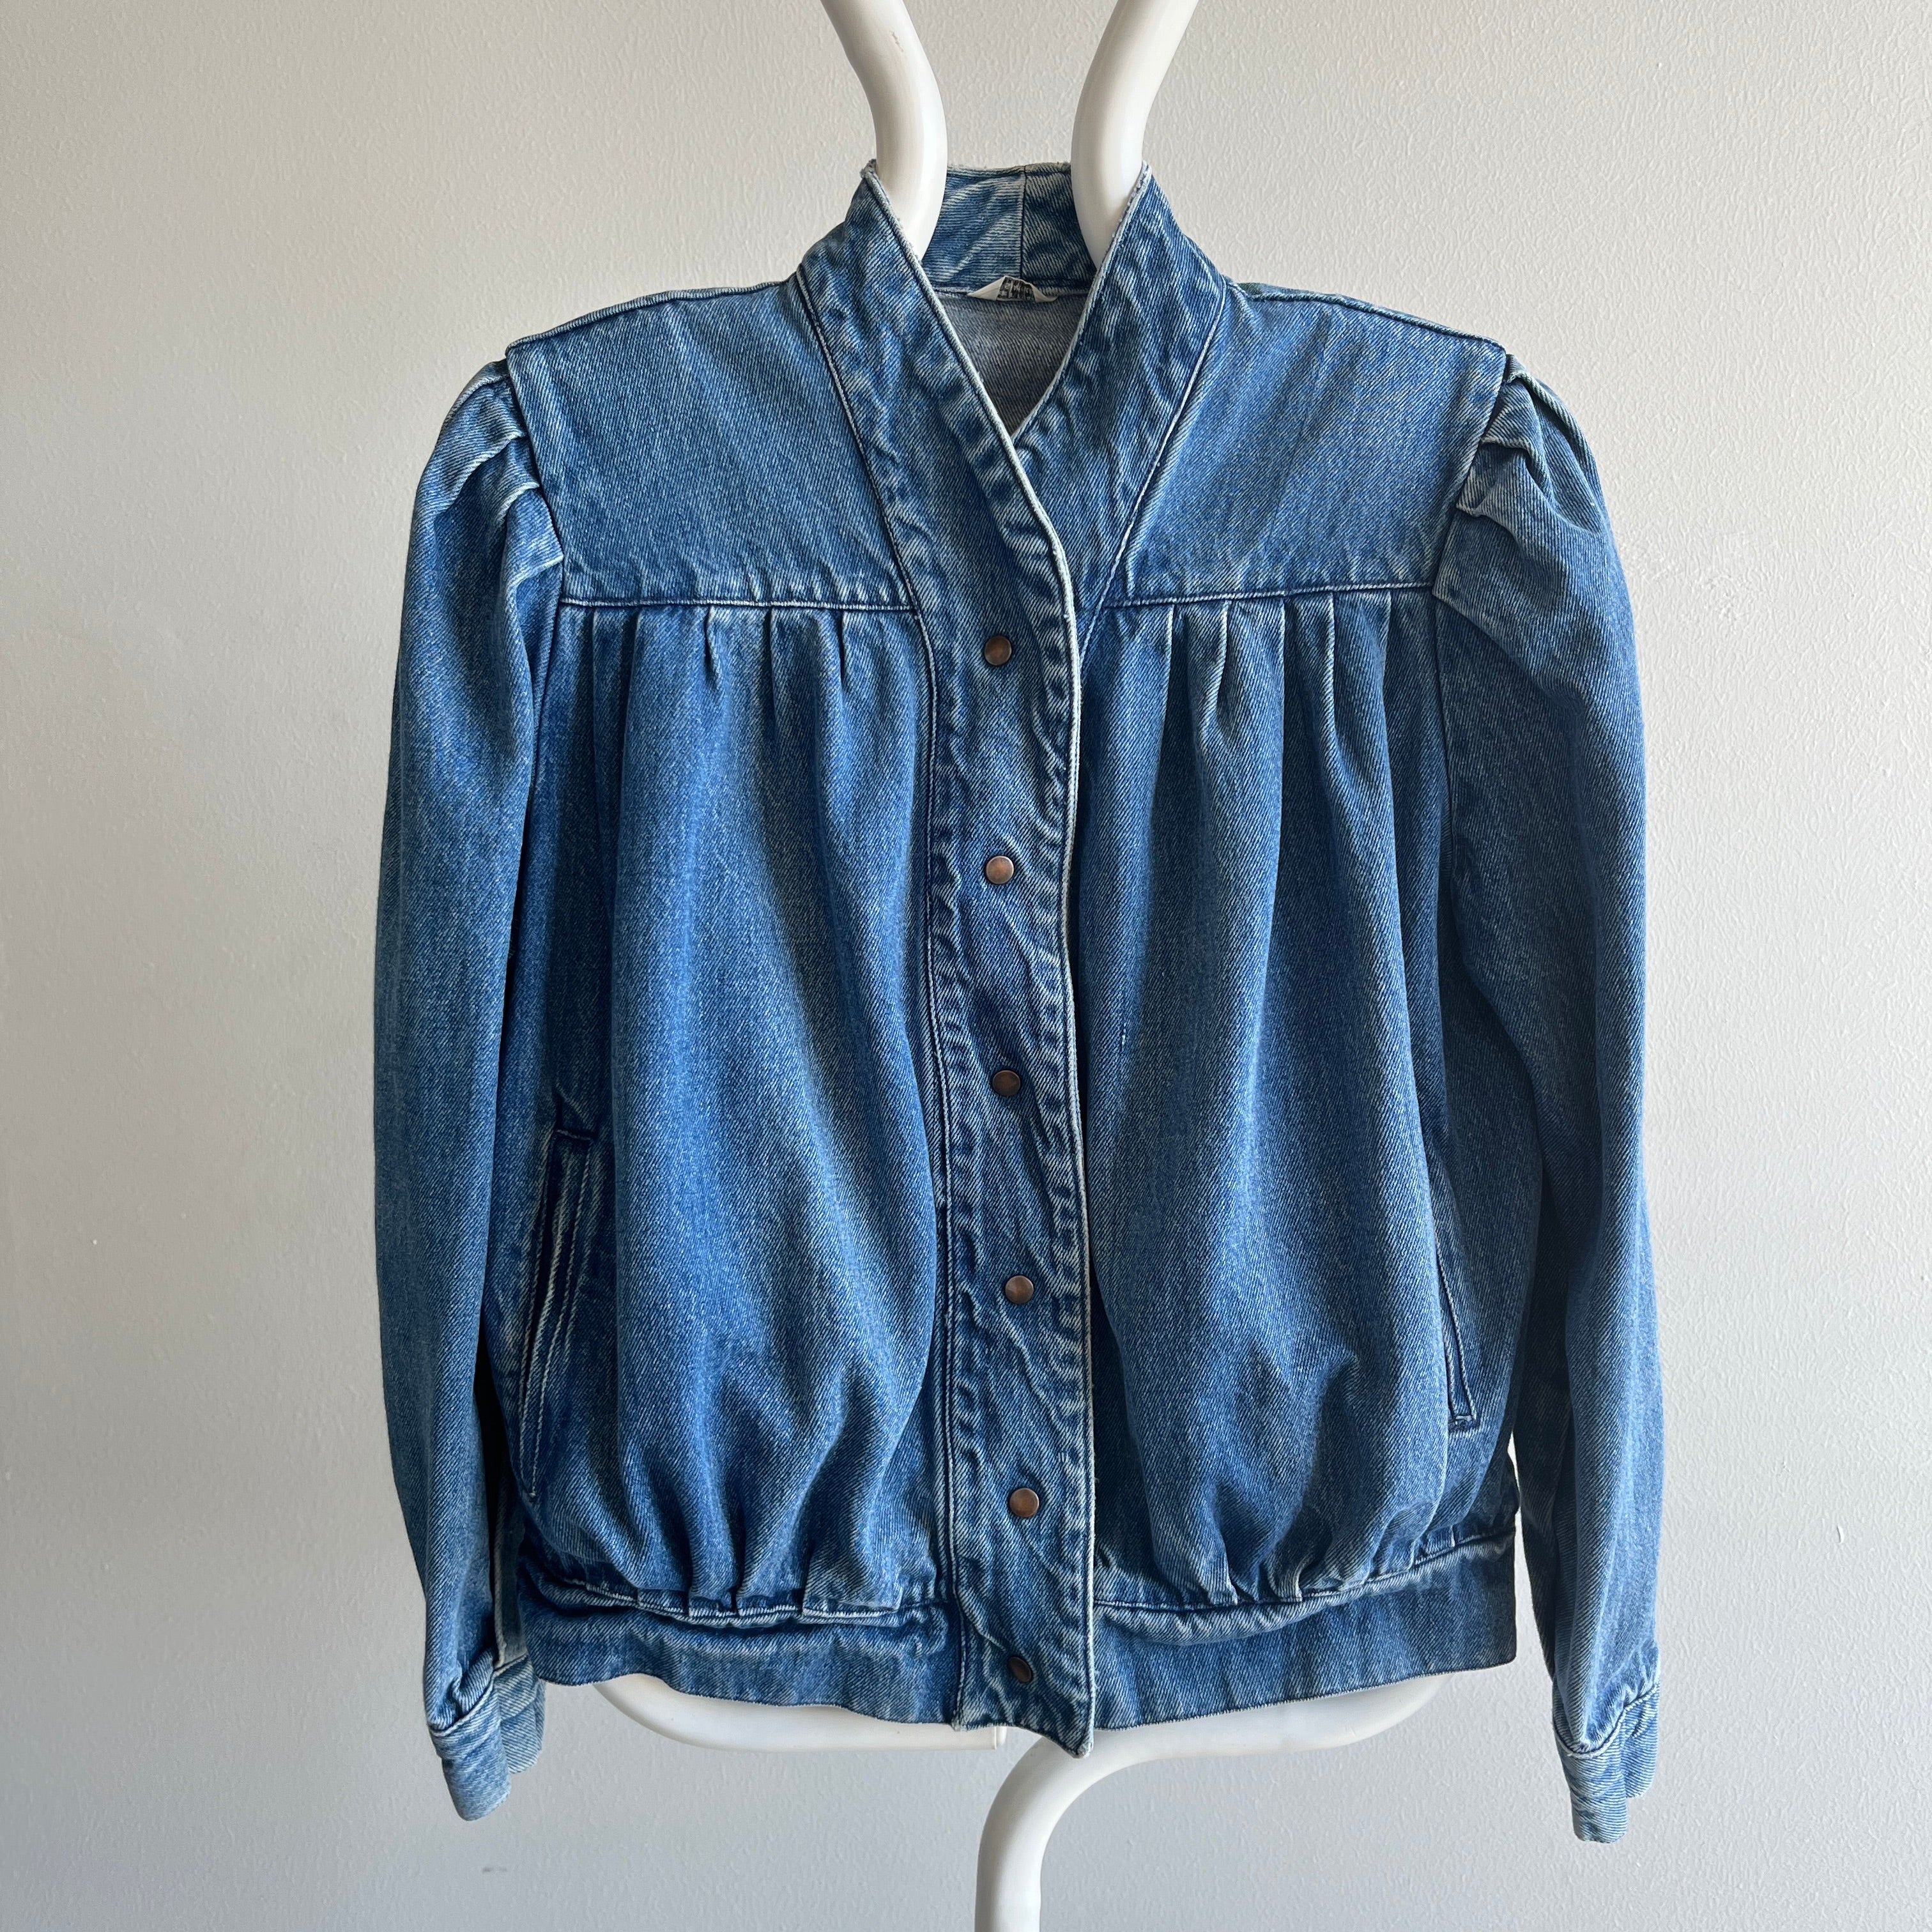 1980s Pleaded Denim Jacket with Snaps and.... SHOULDER PADS! Holy Moly!